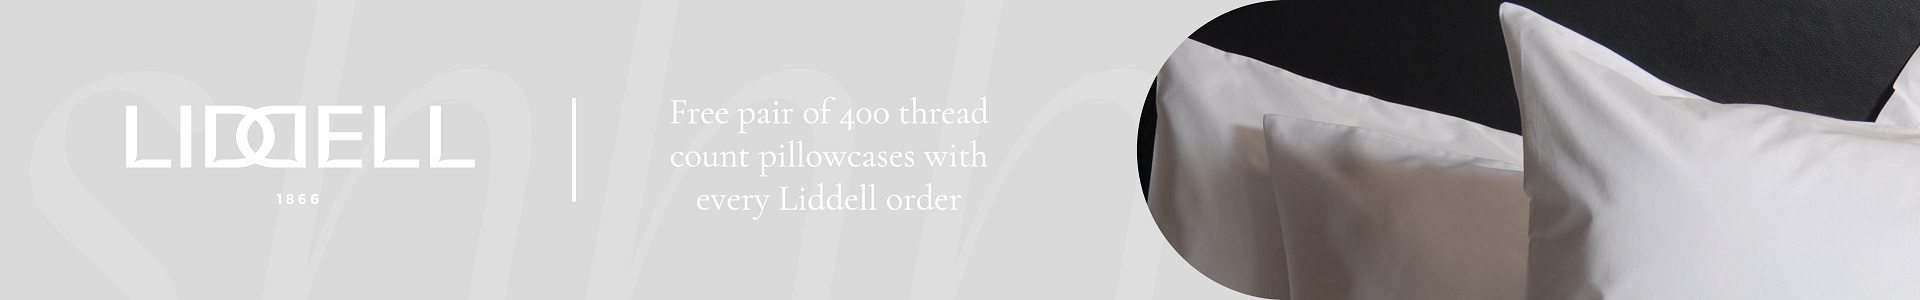 Get a free pair of 400 thread count pillowcases when you buy any Liddell branded product